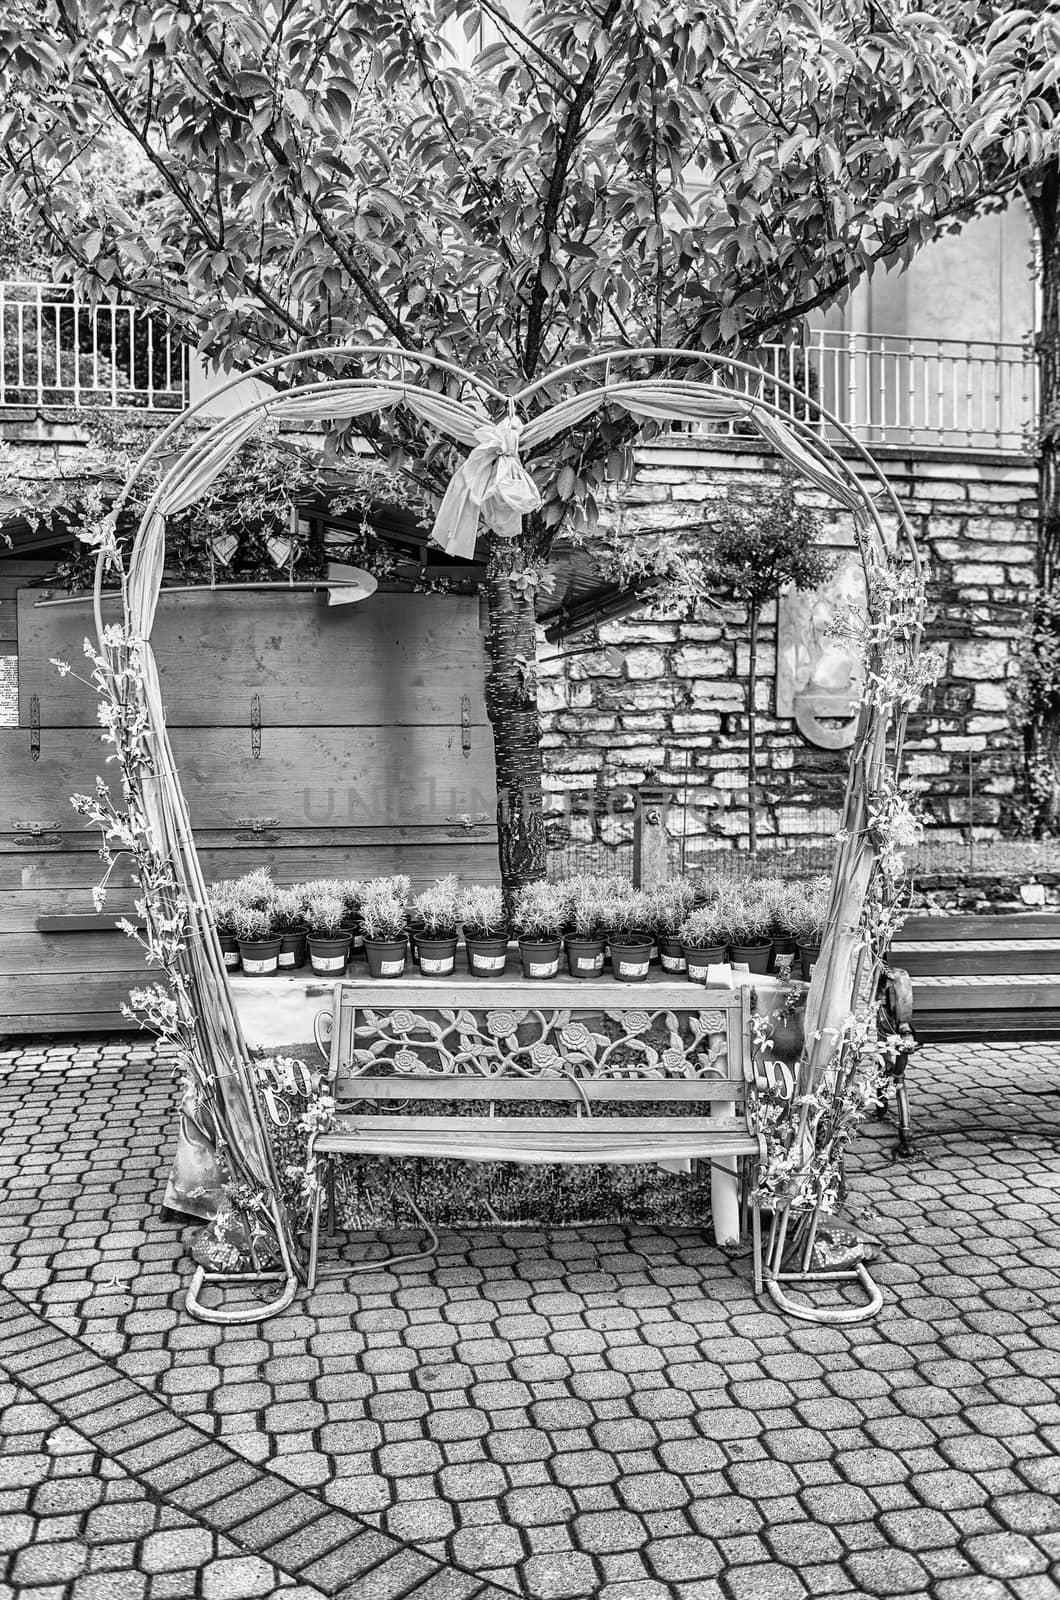 Scenic heart-shaped bench decorated with flowers and laces by marcorubino